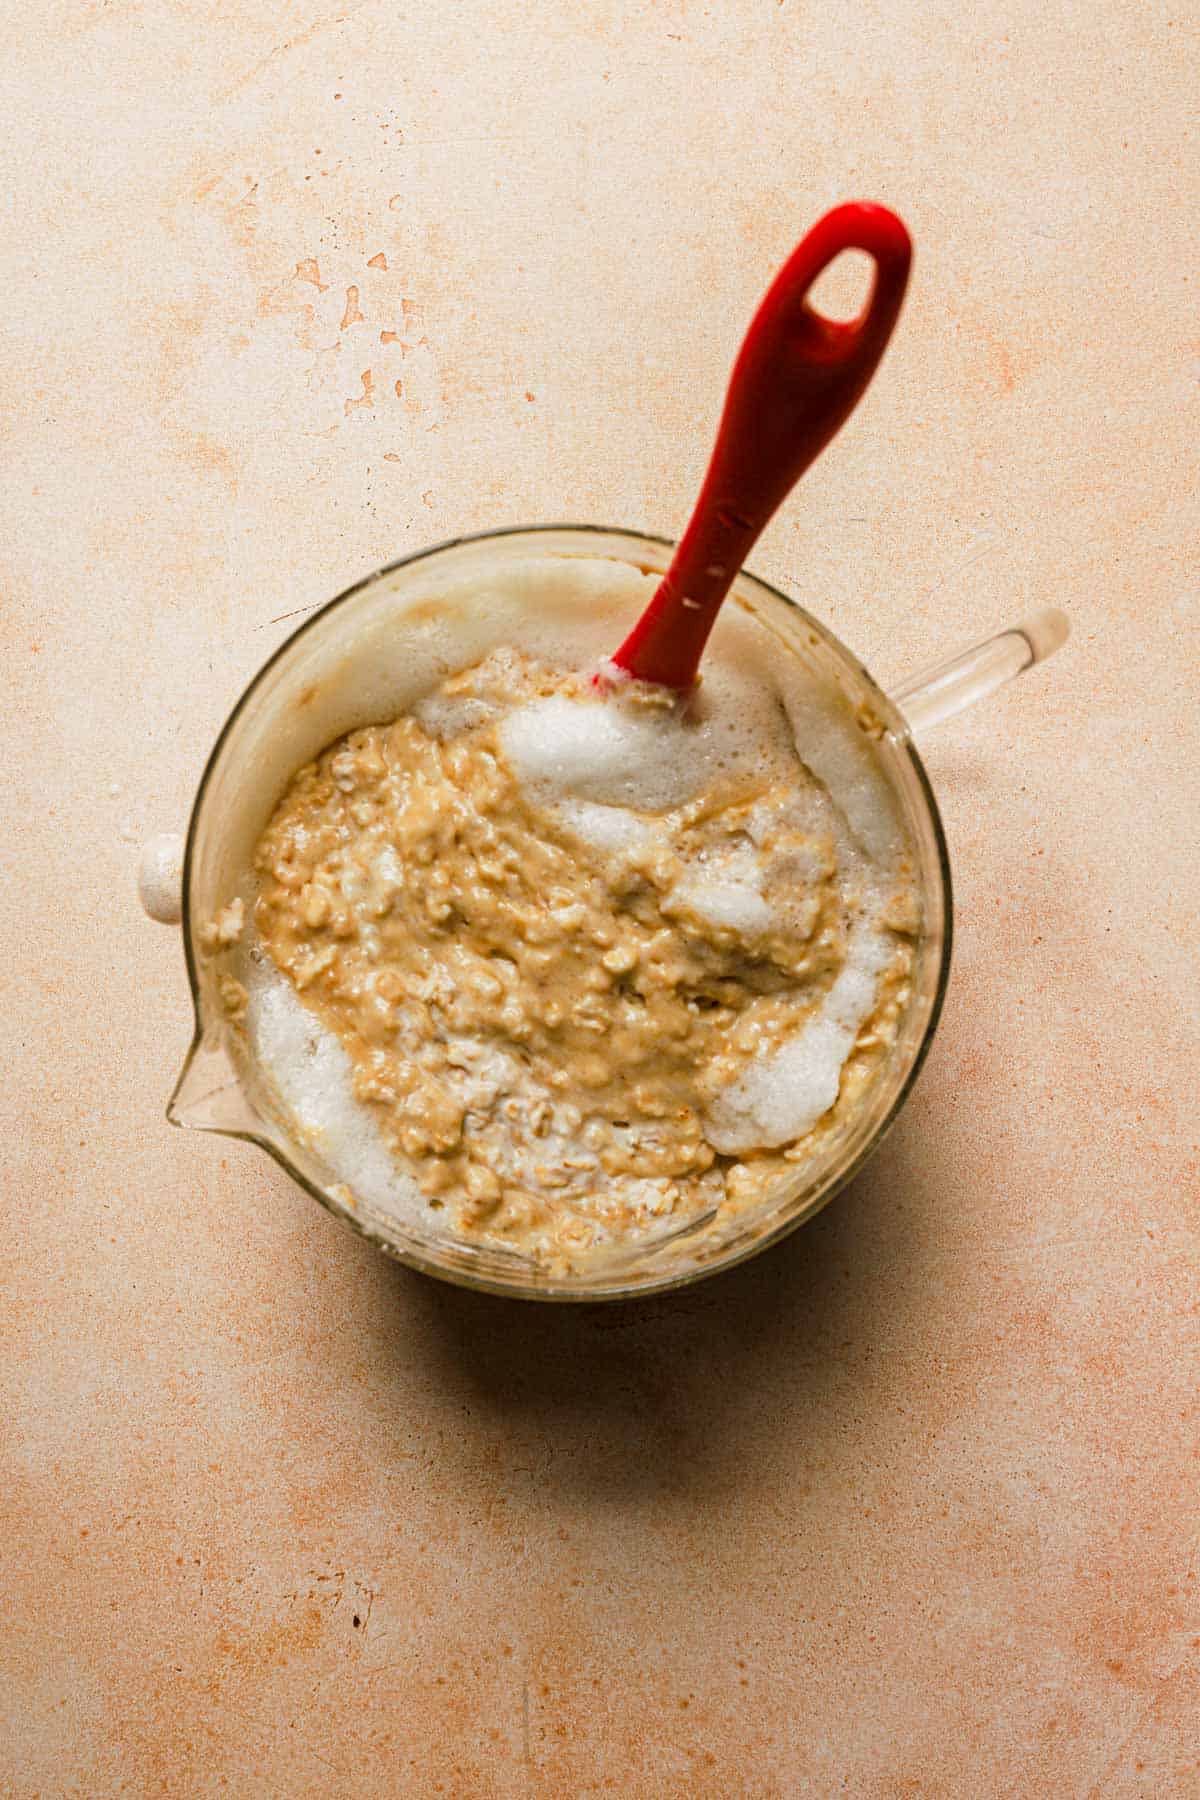 Mixing beaten egg whites into oatmeal pancake batter in large glass measuring bowl with spatula.